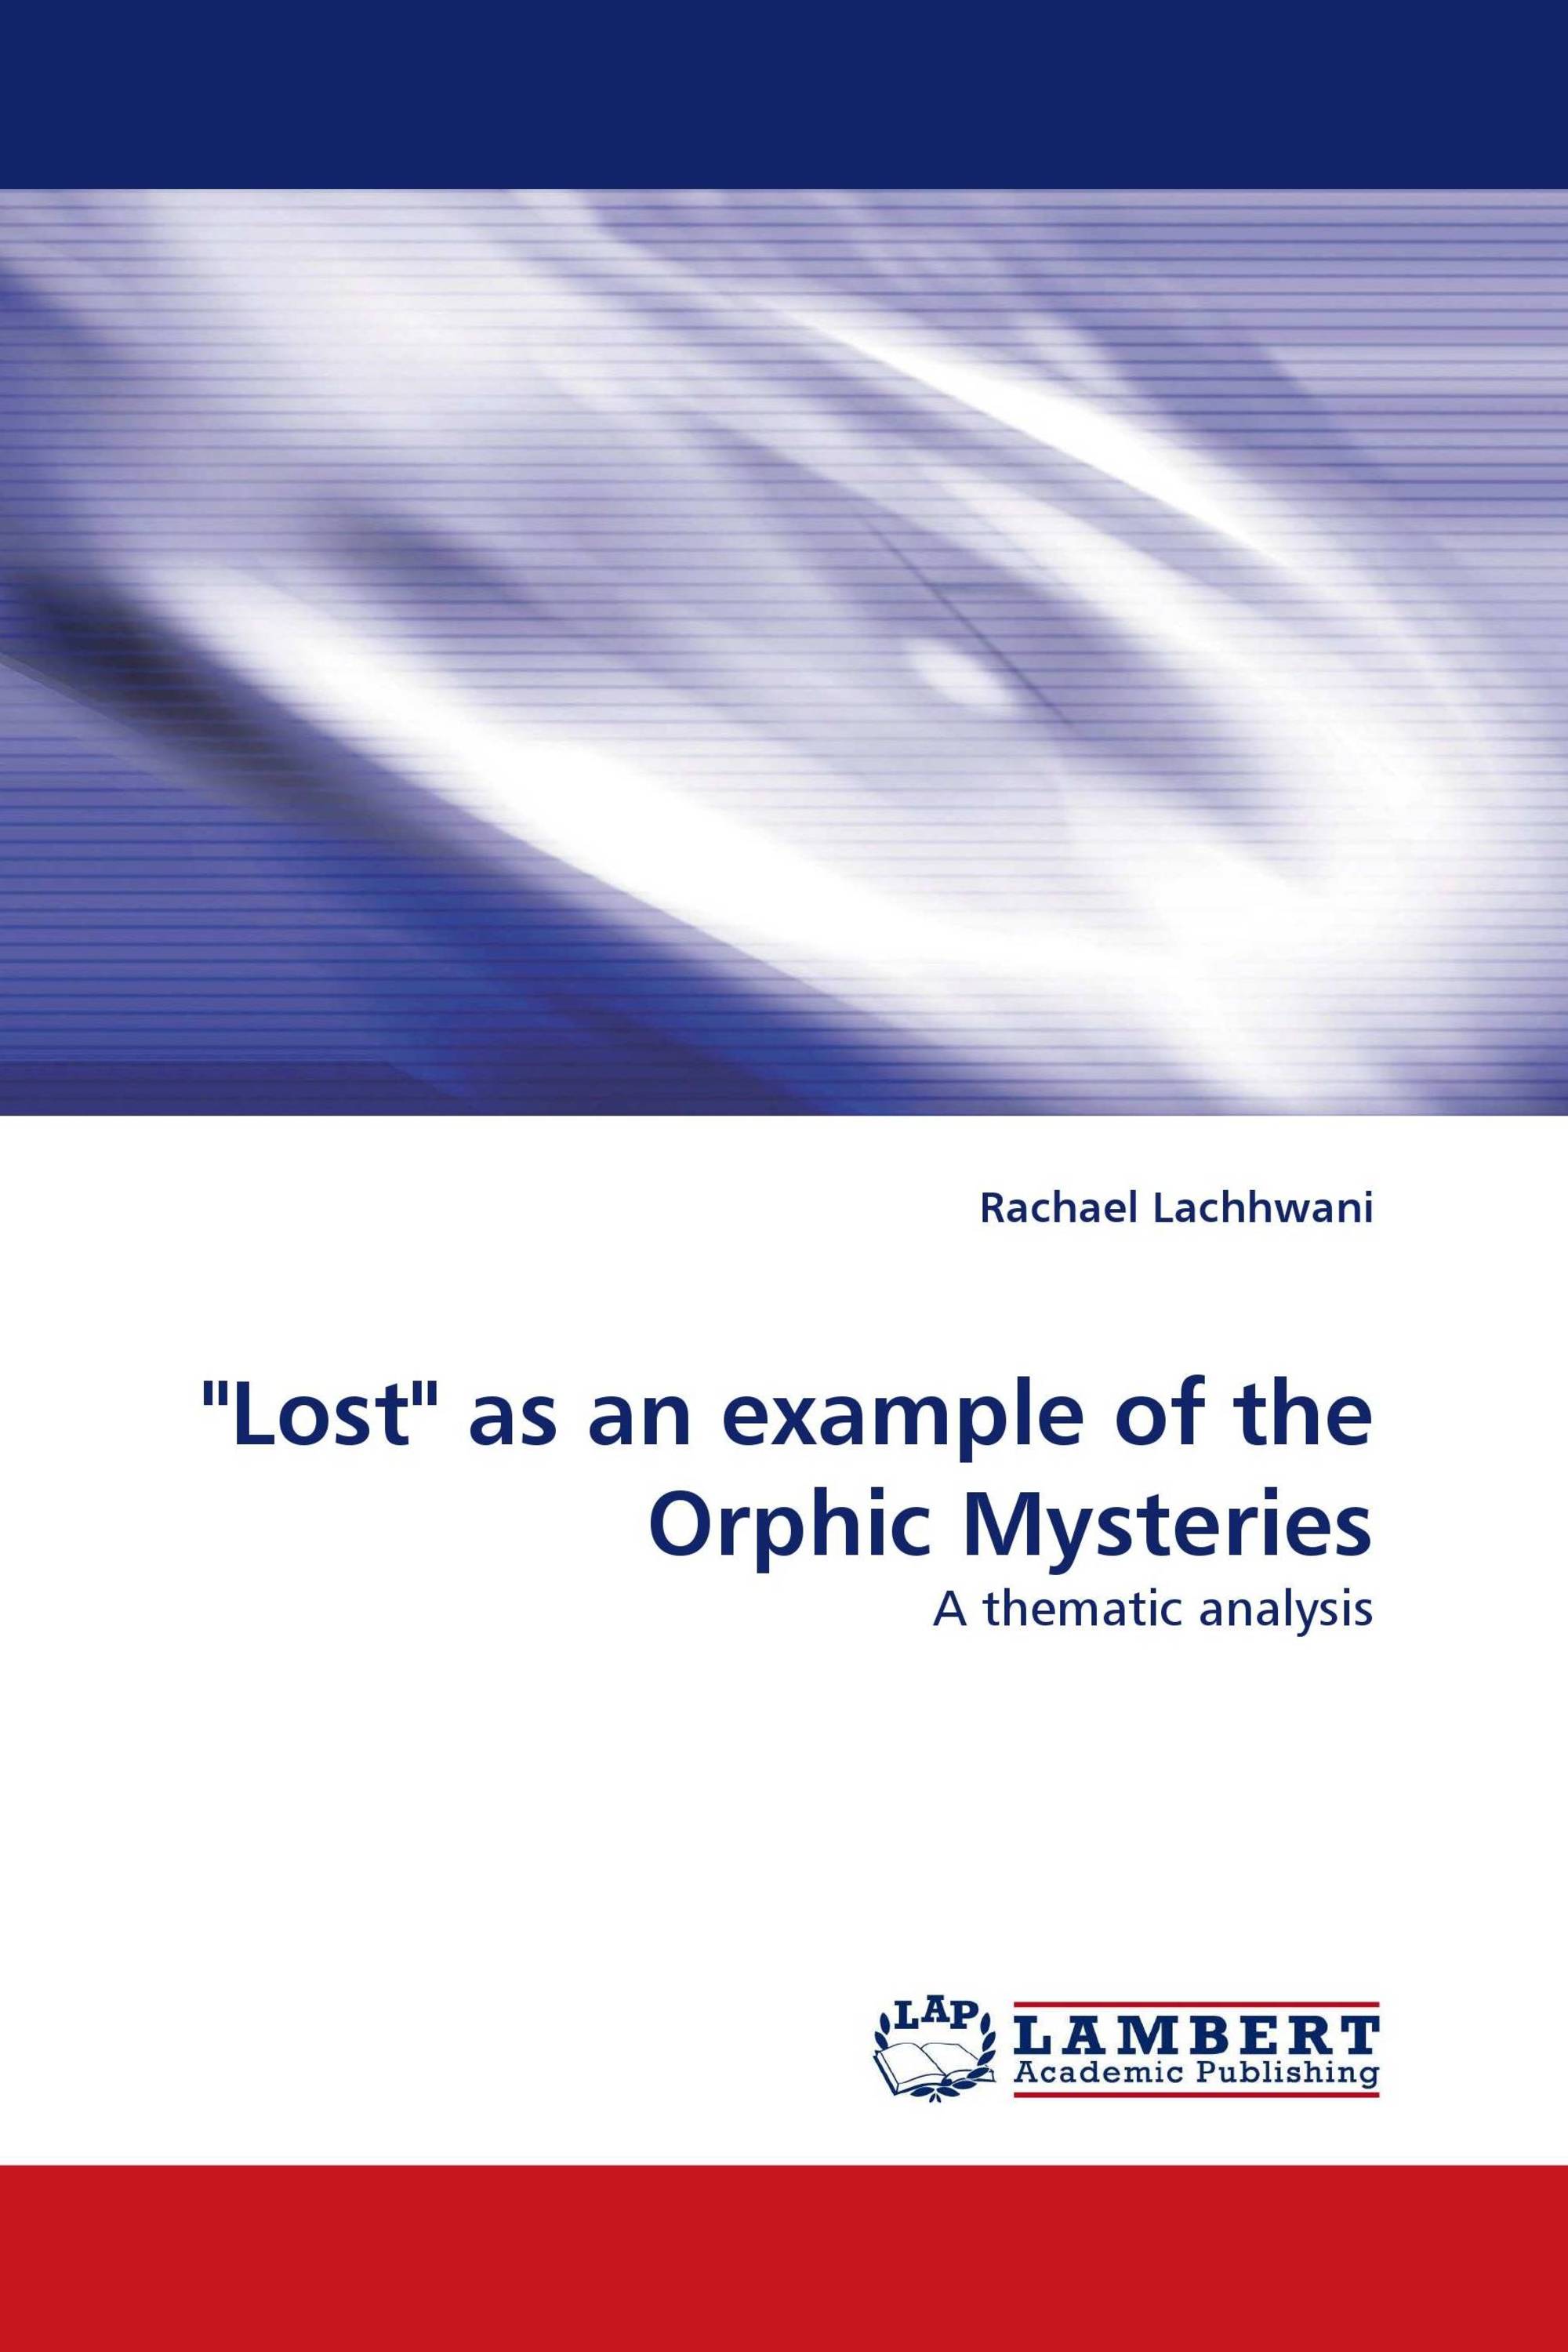 "Lost" as an example of the Orphic Mysteries